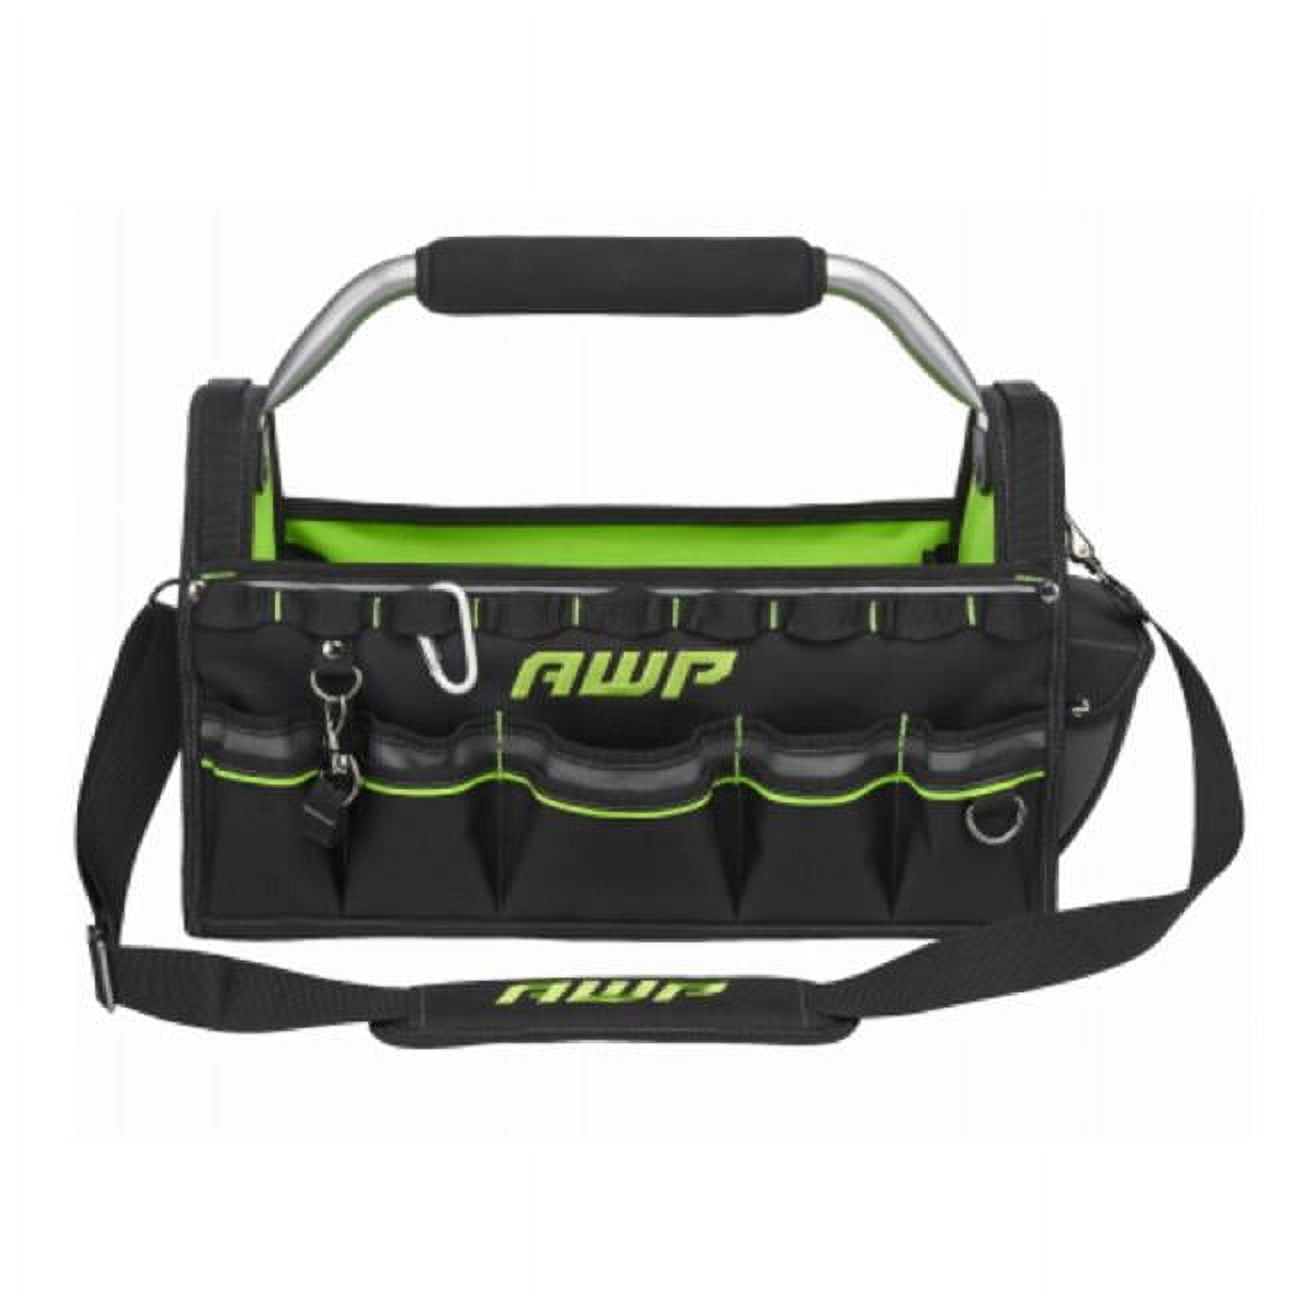 AWP (Advanced Work Products) - TrapJaw™ 12 inch Tool Bag - YouTube